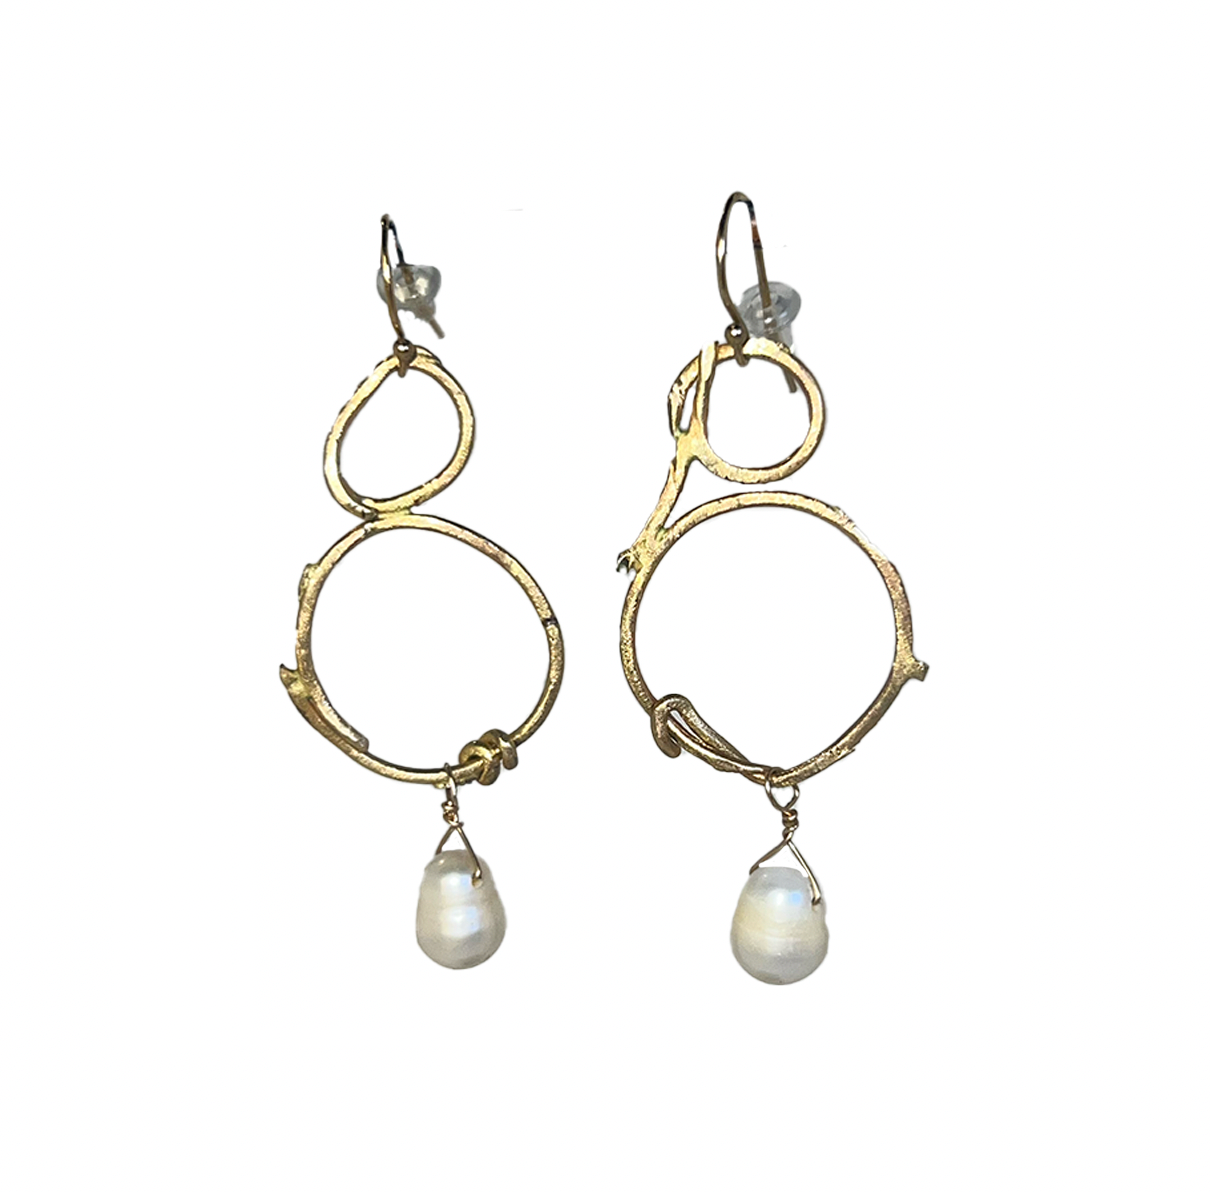 Sue Klein, Gold Circle Drop Earrings with Pearls